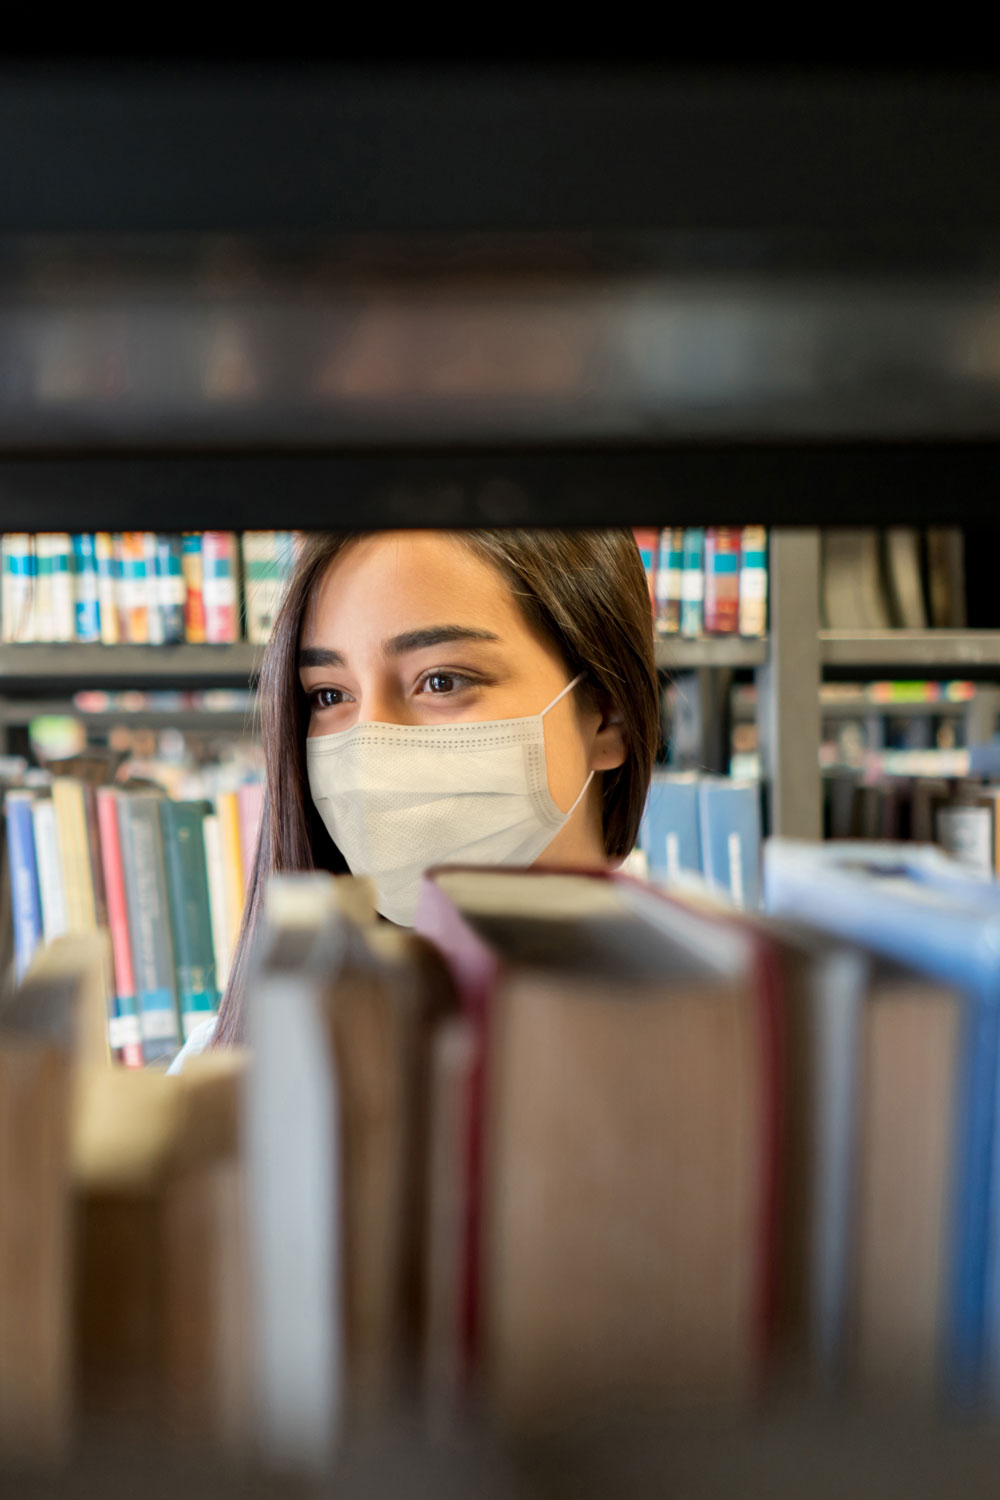 photo - Student Wearing a Facemask at the Library While Looking for a Book